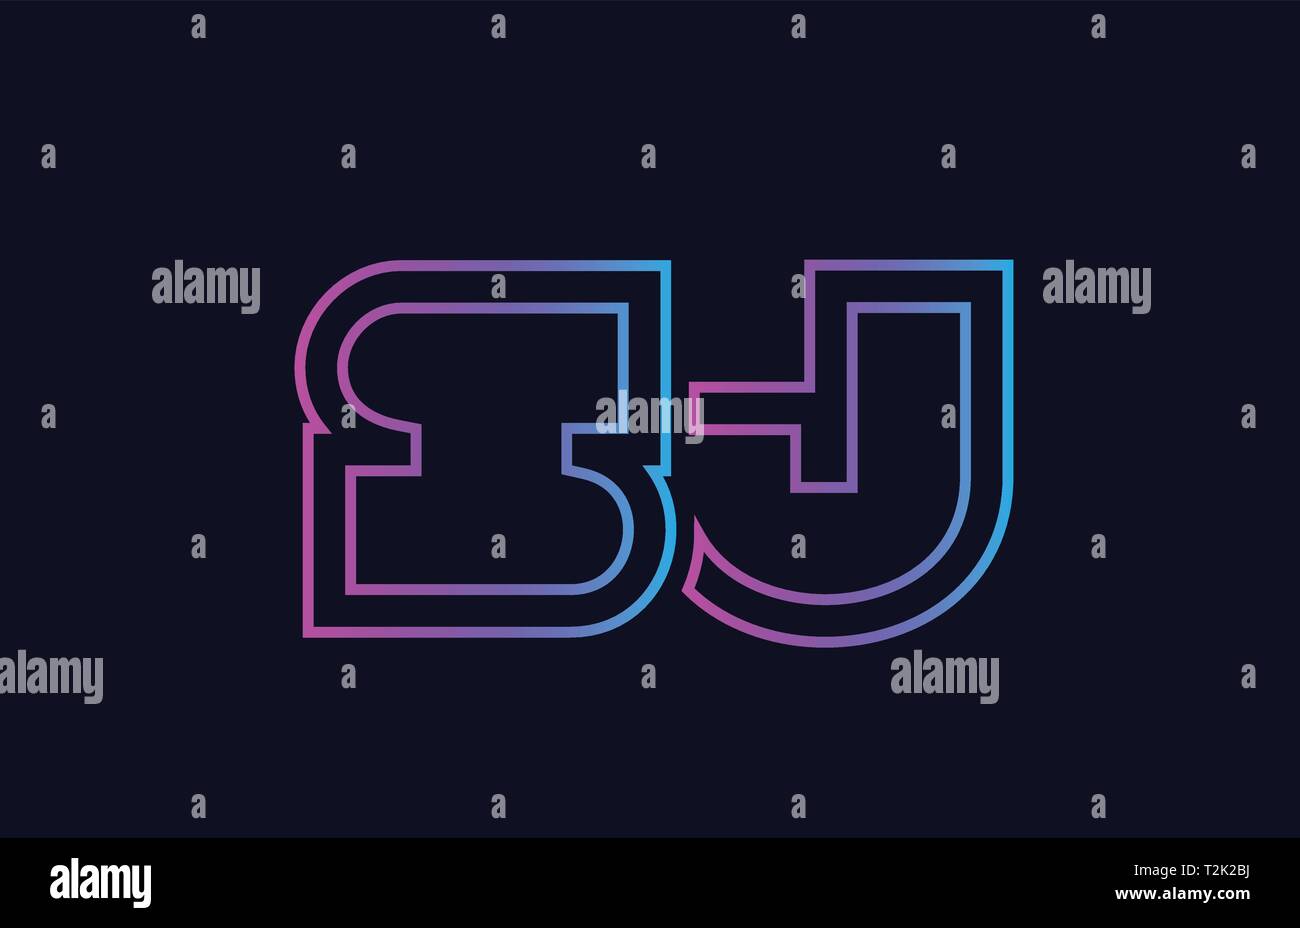 blue pink alphabet letter logo combination sj s j design suitable for a company or business Stock Vector